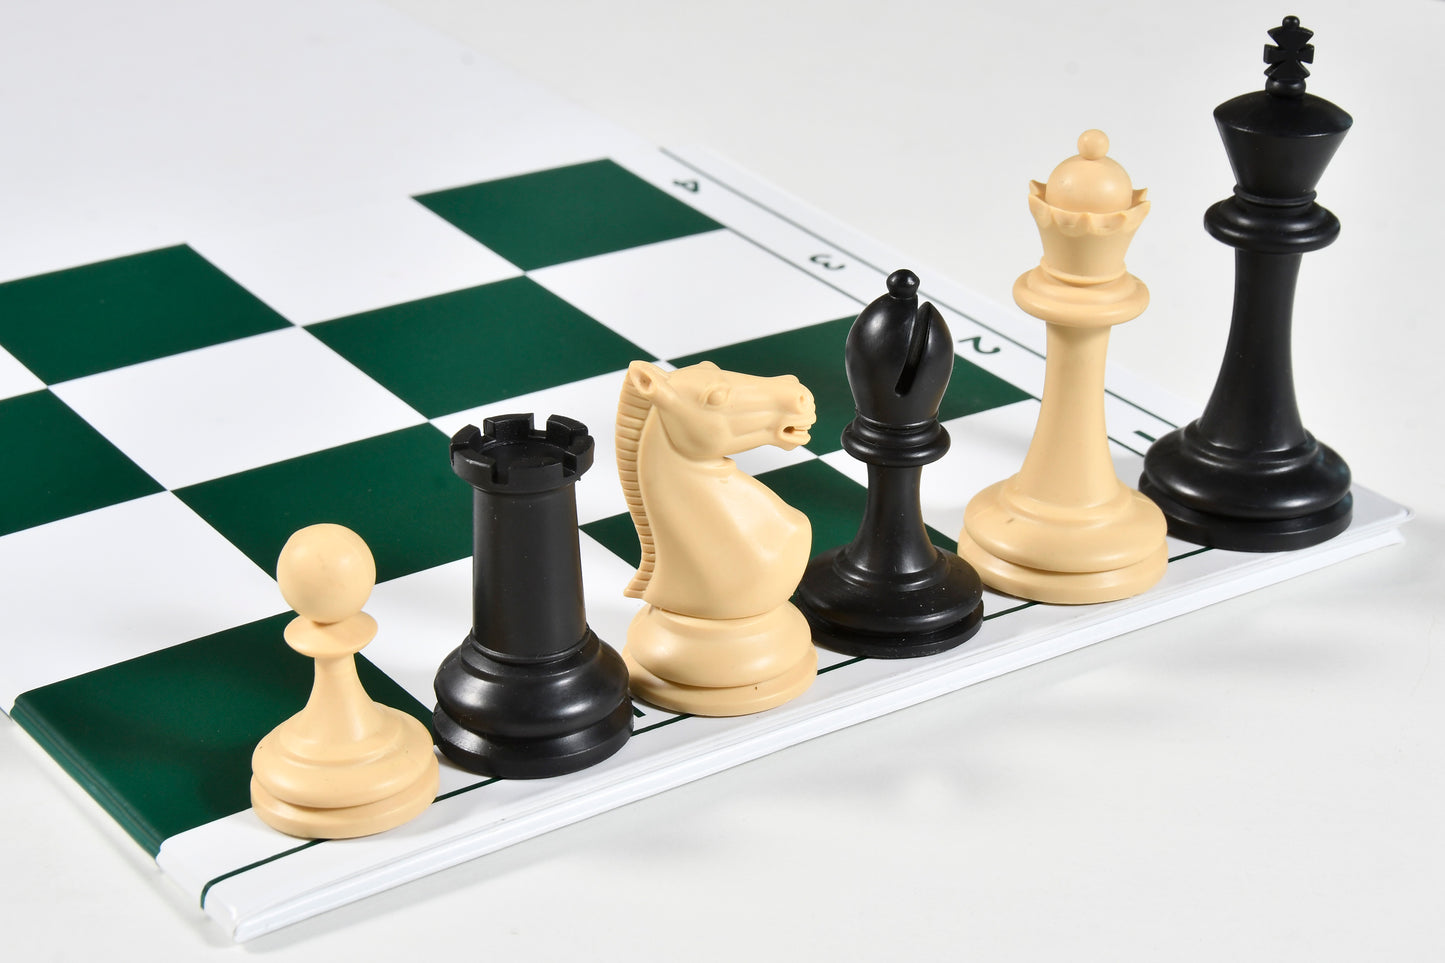 The Blitz Series Plastic Chess Pieces in Black Dyed & Natural White Solid Plastic - 3.8" King